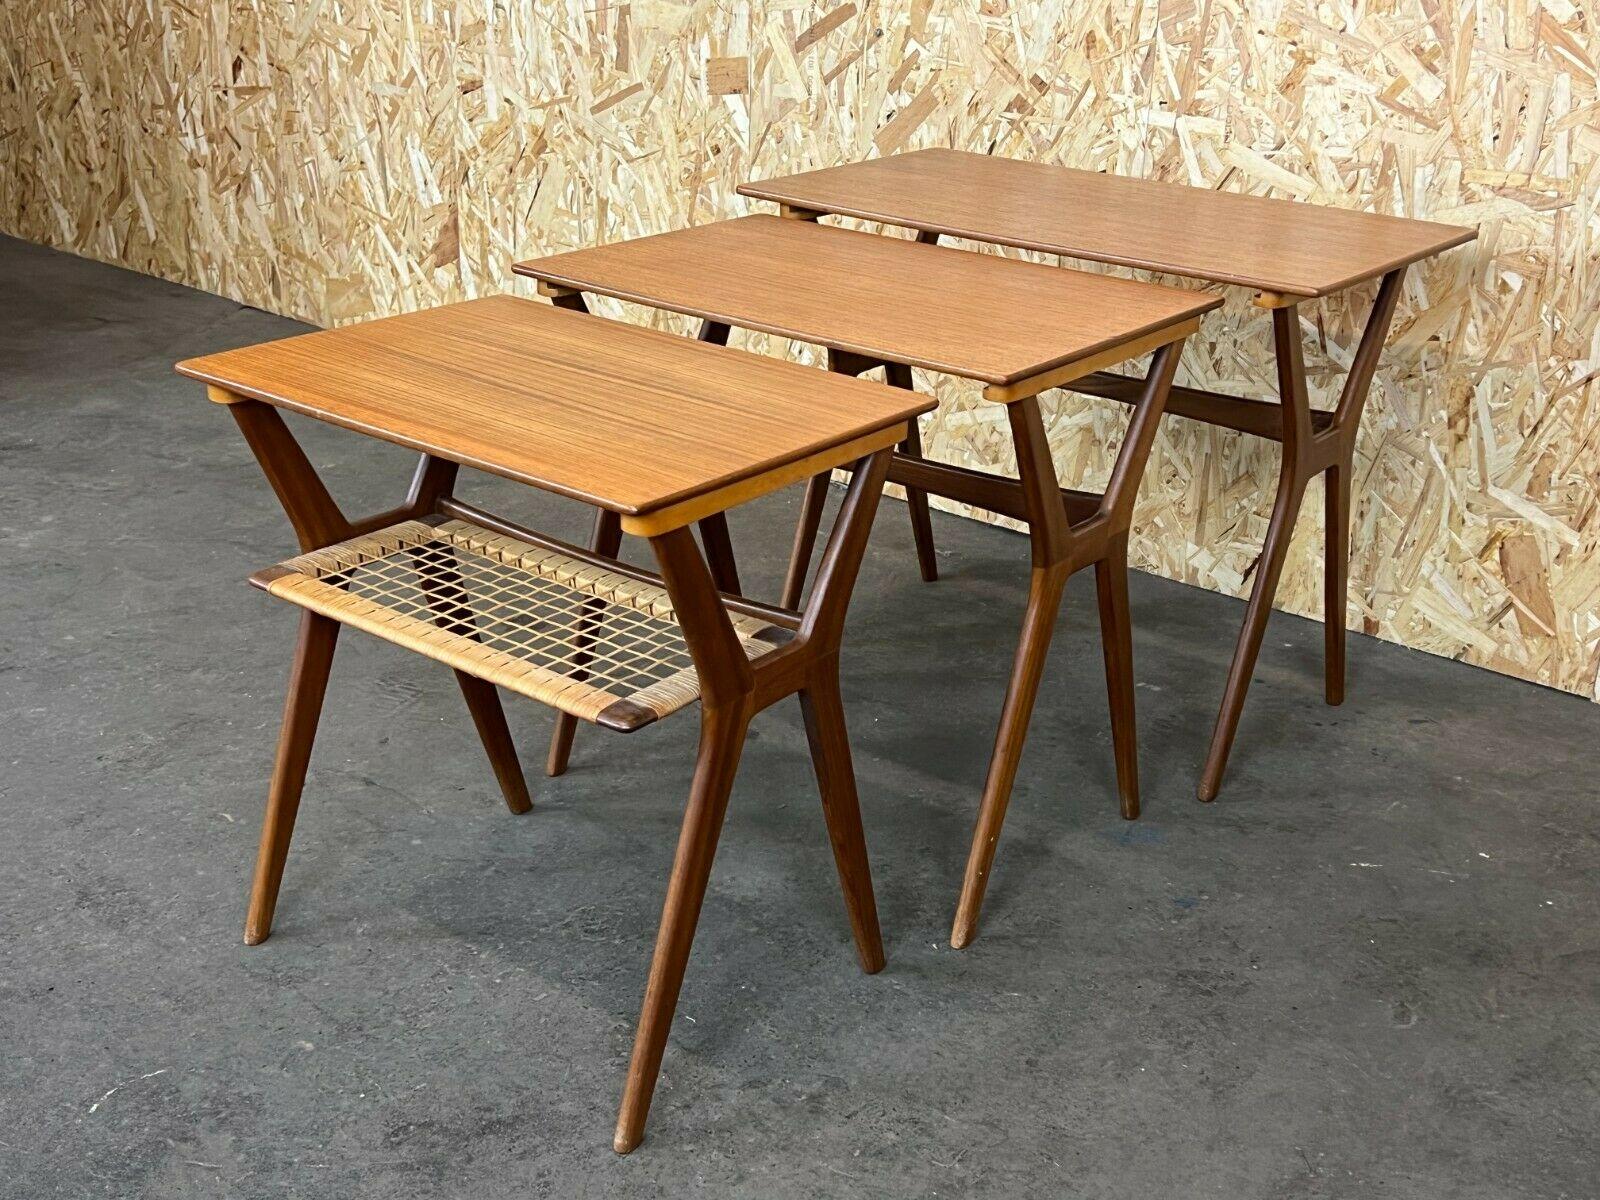 60s 70s Teak Nesting Tables Side Table Side Tables Danish Modern 60s

Object: side tables

Manufacturer:

Condition: good - vintage

Age: around 1960-1970

Dimensions:

66cm x 38cm x 53cm

Other notes:

The pictures serve as part of